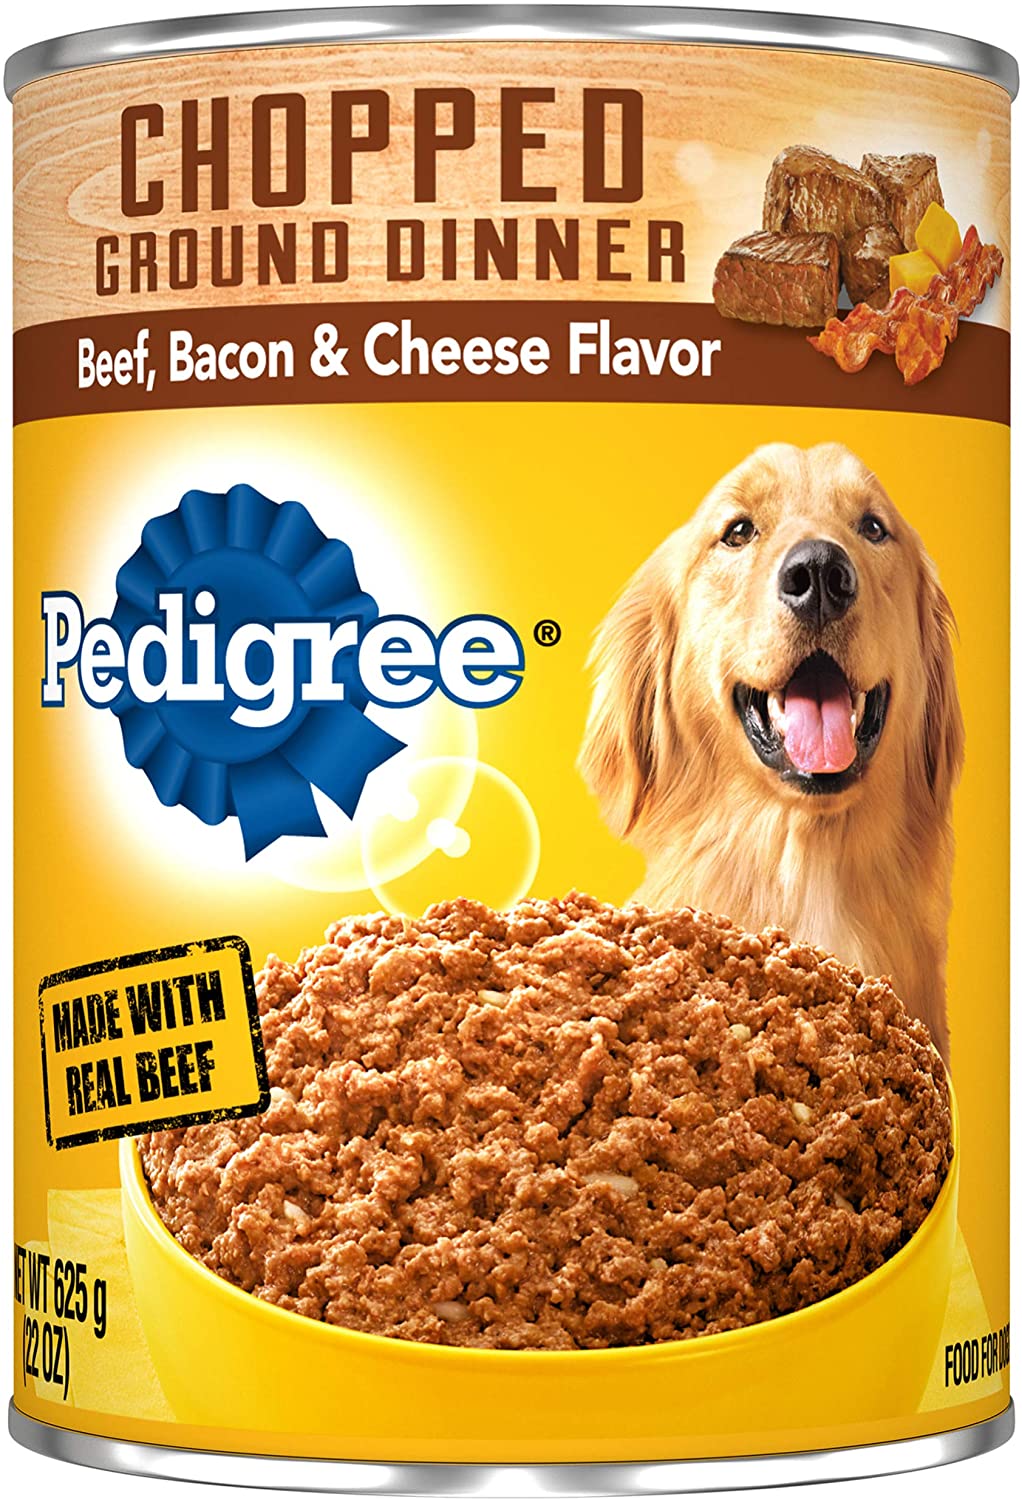 Pedigree Chopped Ground Dinner Wet Dog Food, 22 oz. Cans (Pack of 12)